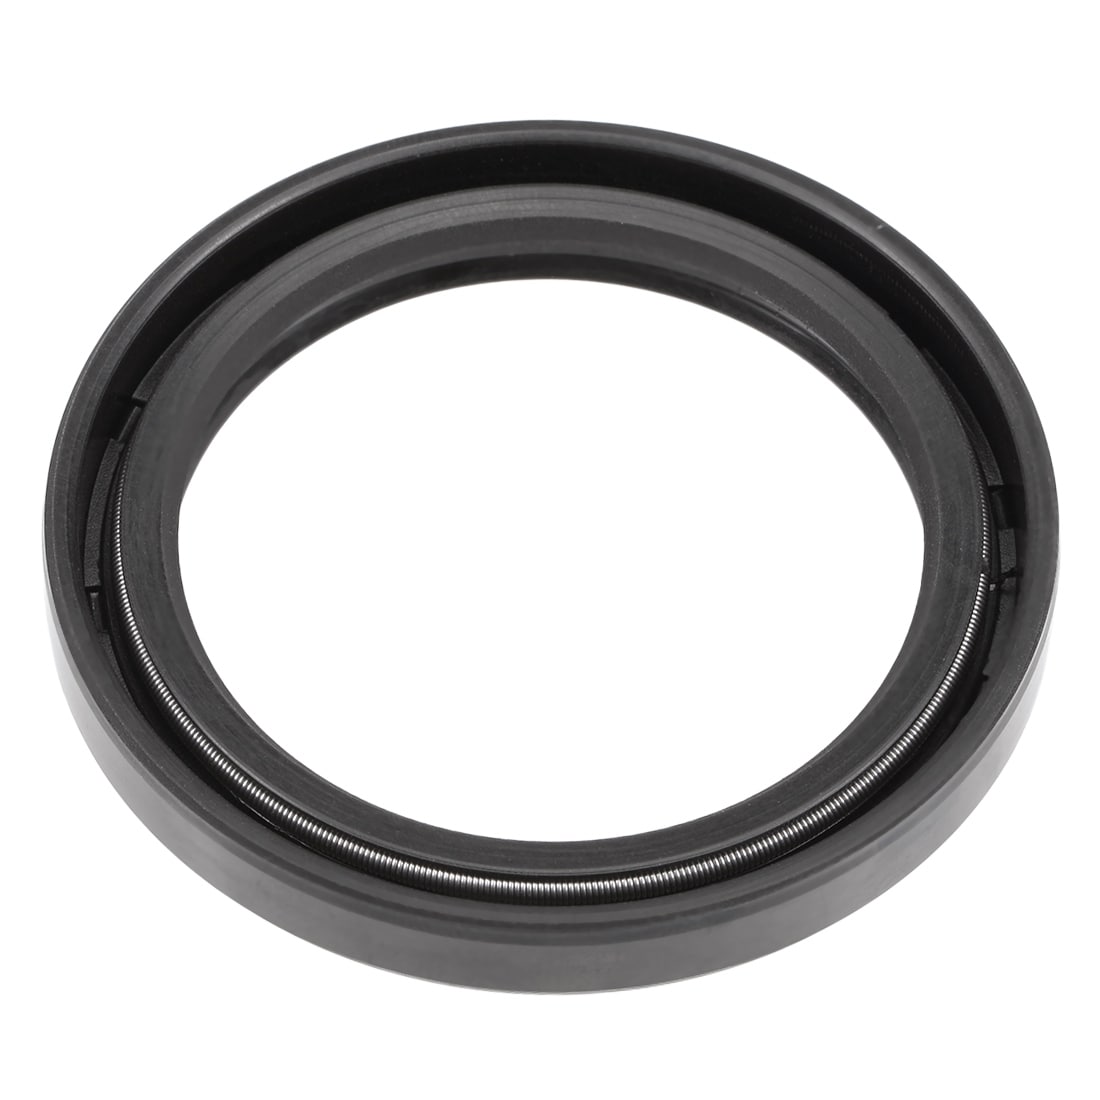 Oil Seal Size 12mm X 21mm X 7mm 2 Pack